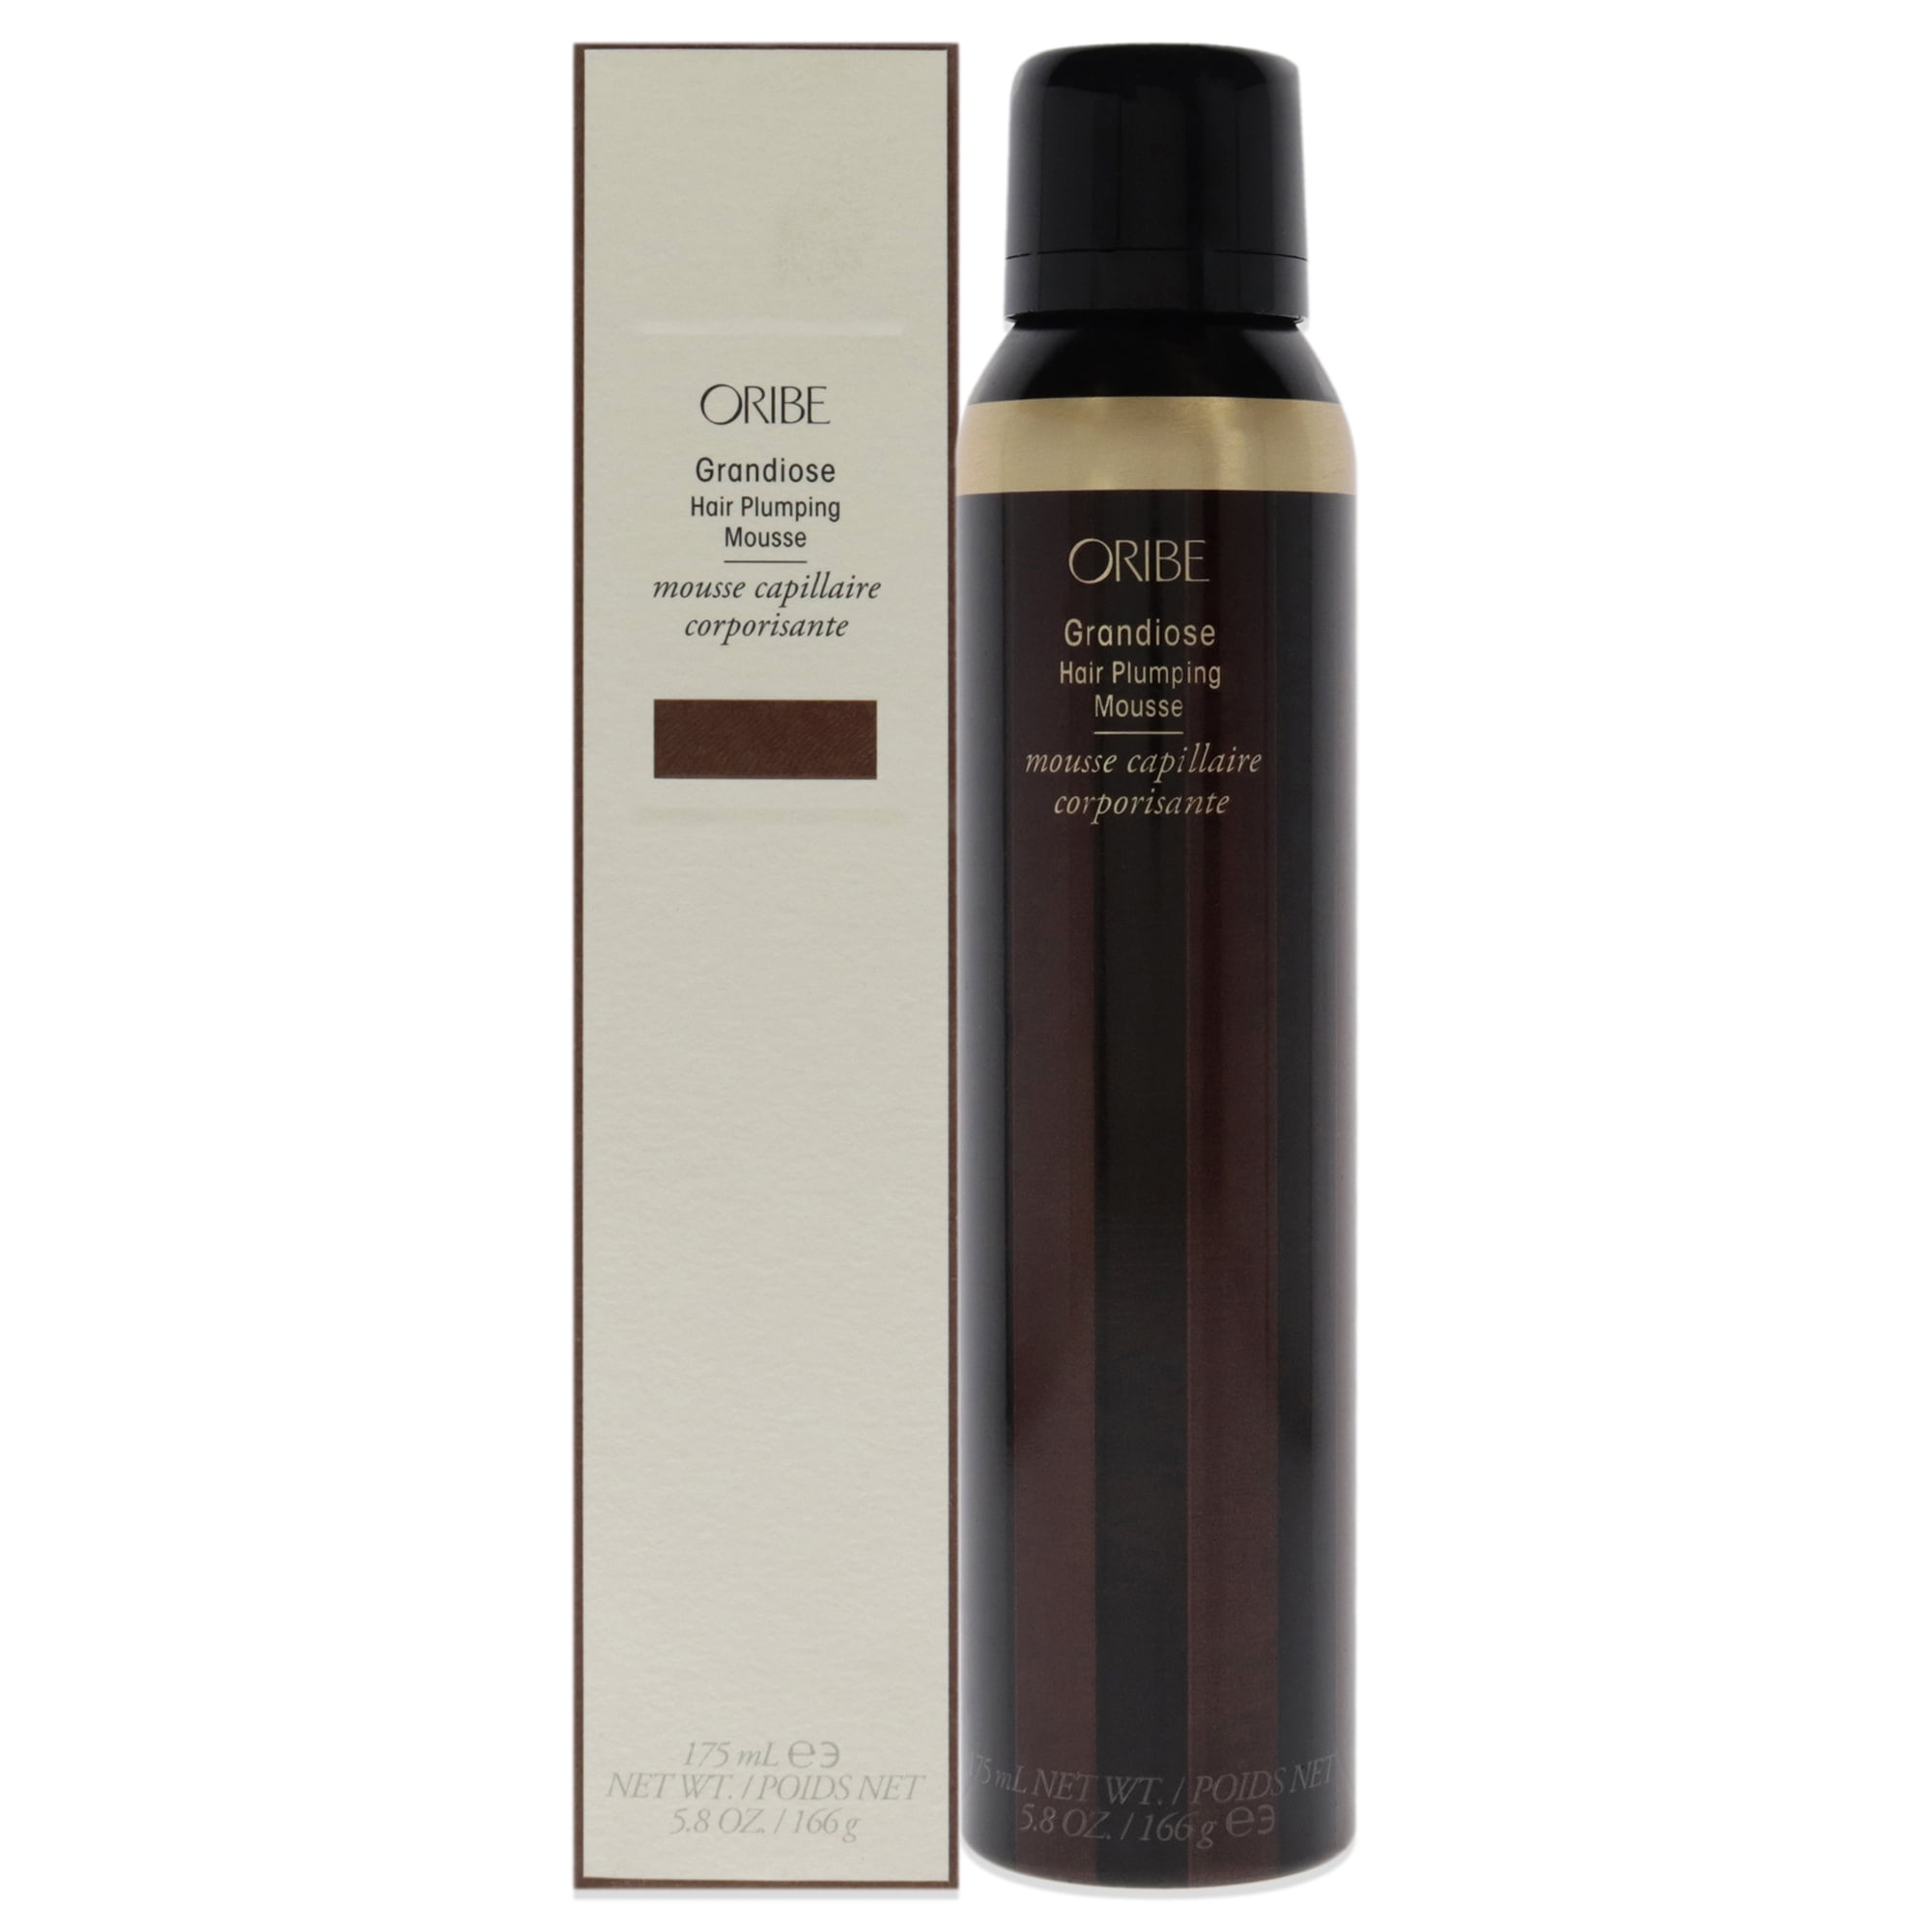 Grandiose Hair Plumping Mousse by Oribe for Unisex - 5.7 oz Mousse ...